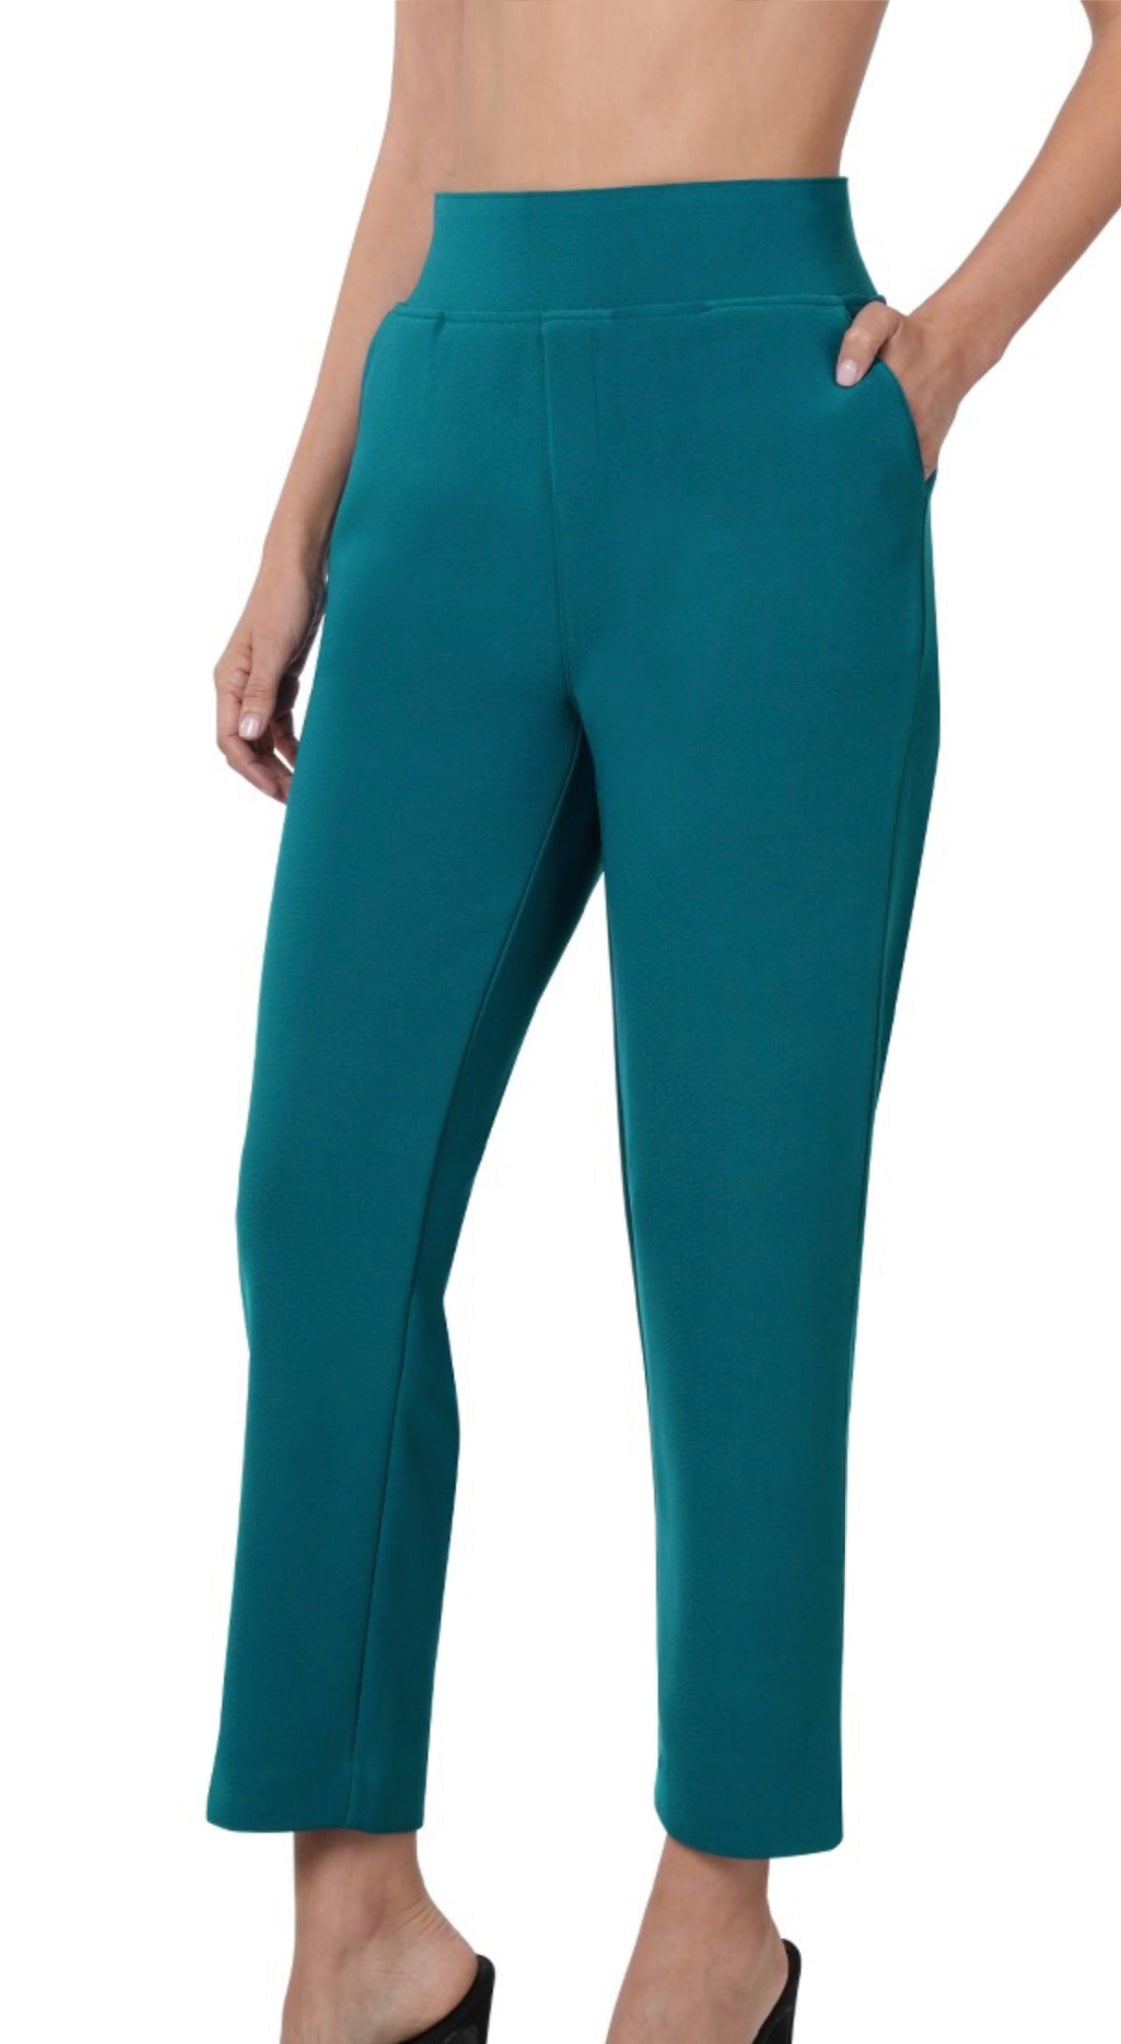 Delightful Must Have Pull On Work Pants in Teal and Ash Grey – The Grey  Nickel Boutique